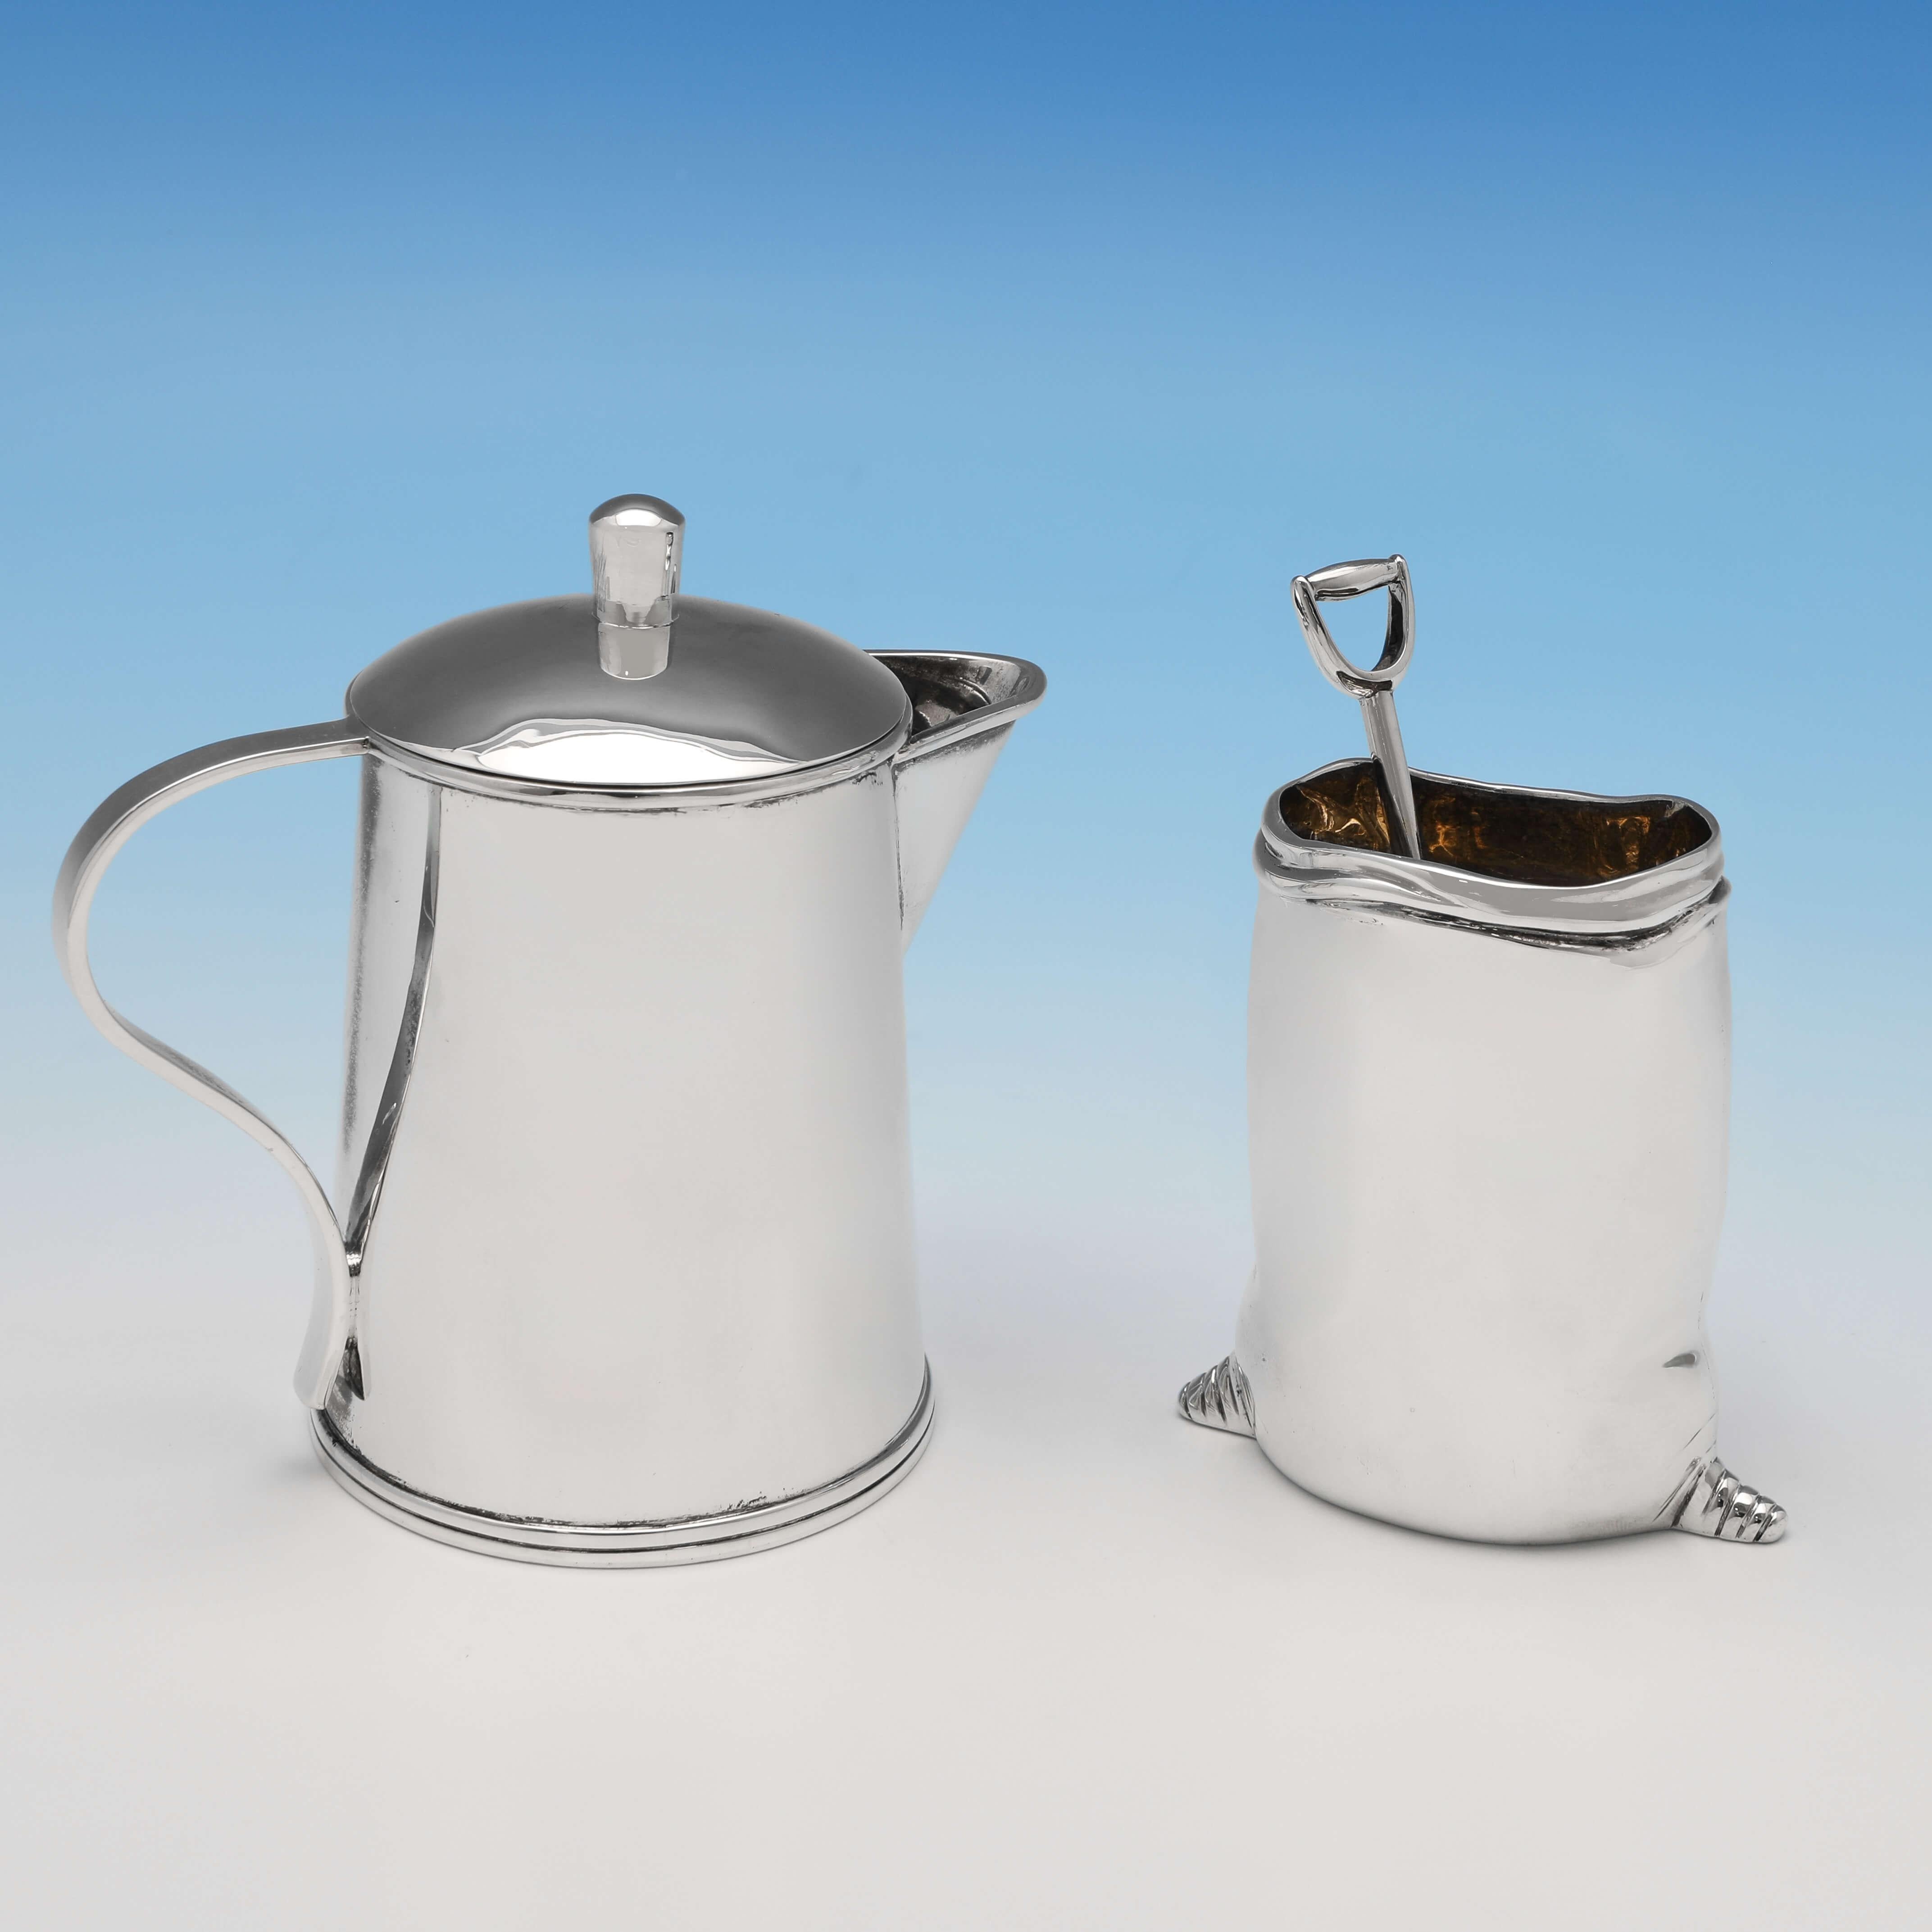 Hallmarked in Birmingham in 2000 by Thistle & Bee, this charming, Novelty Sterling Silver Sugar & Cream Set, is modelled to resemble a large agricultural cream jug and sugar bag with a shovel shaped serving spoon. 

The cream jug measures